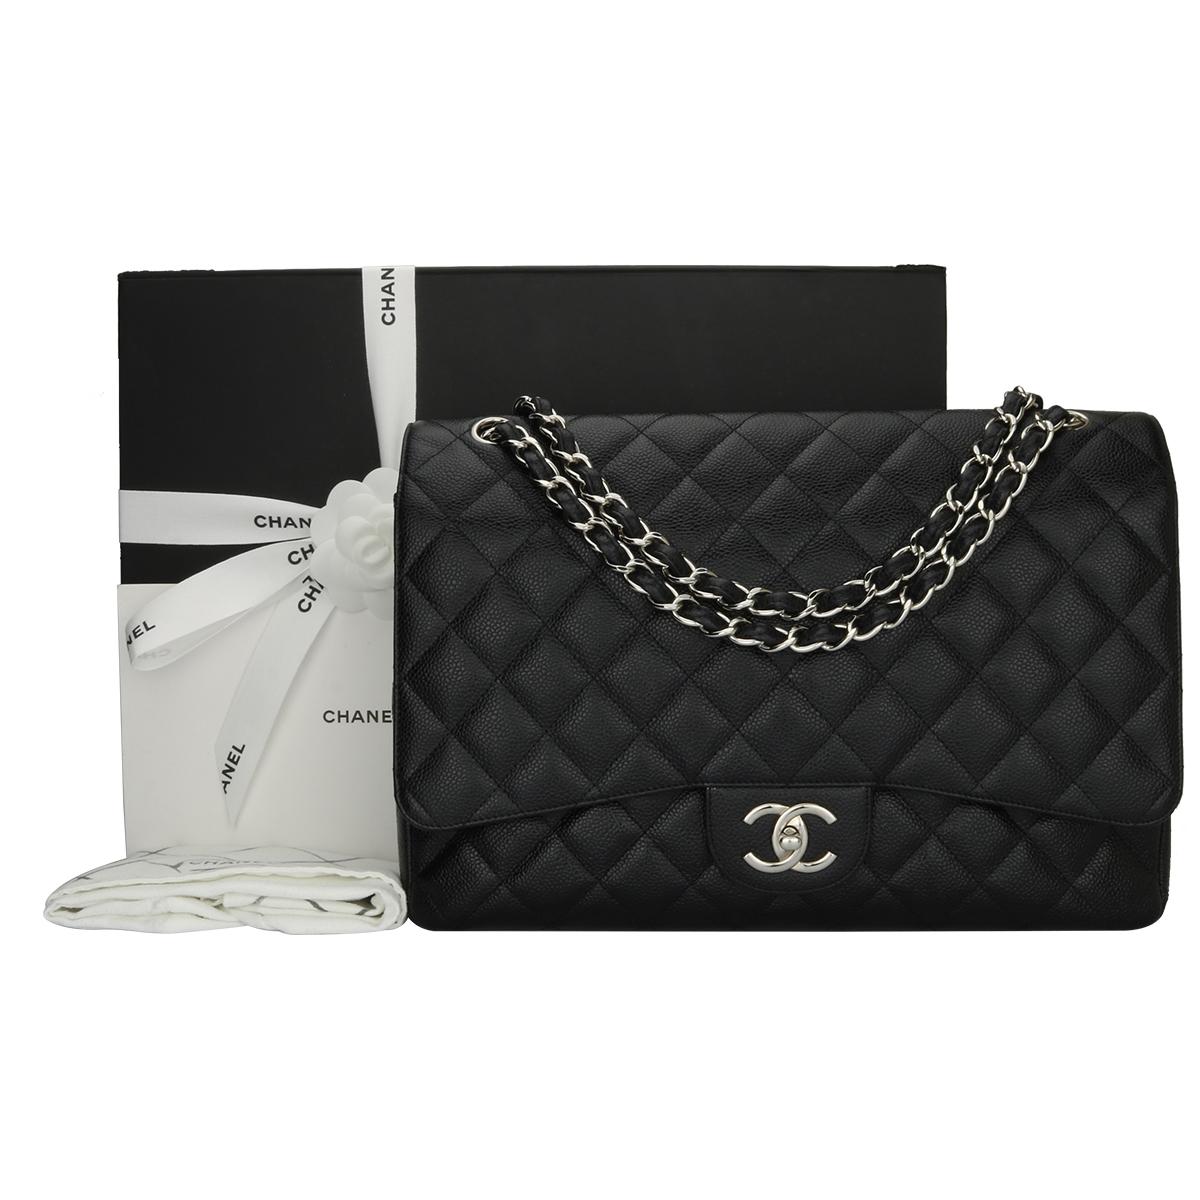 Authentic CHANEL Black Caviar Maxi Double Flap with Silver Hardware 2012.

This stunning bag is in a mint condition, the bag still holds its original shape and the hardware is still very shiny. Leather still smells fresh as if new.

Exterior